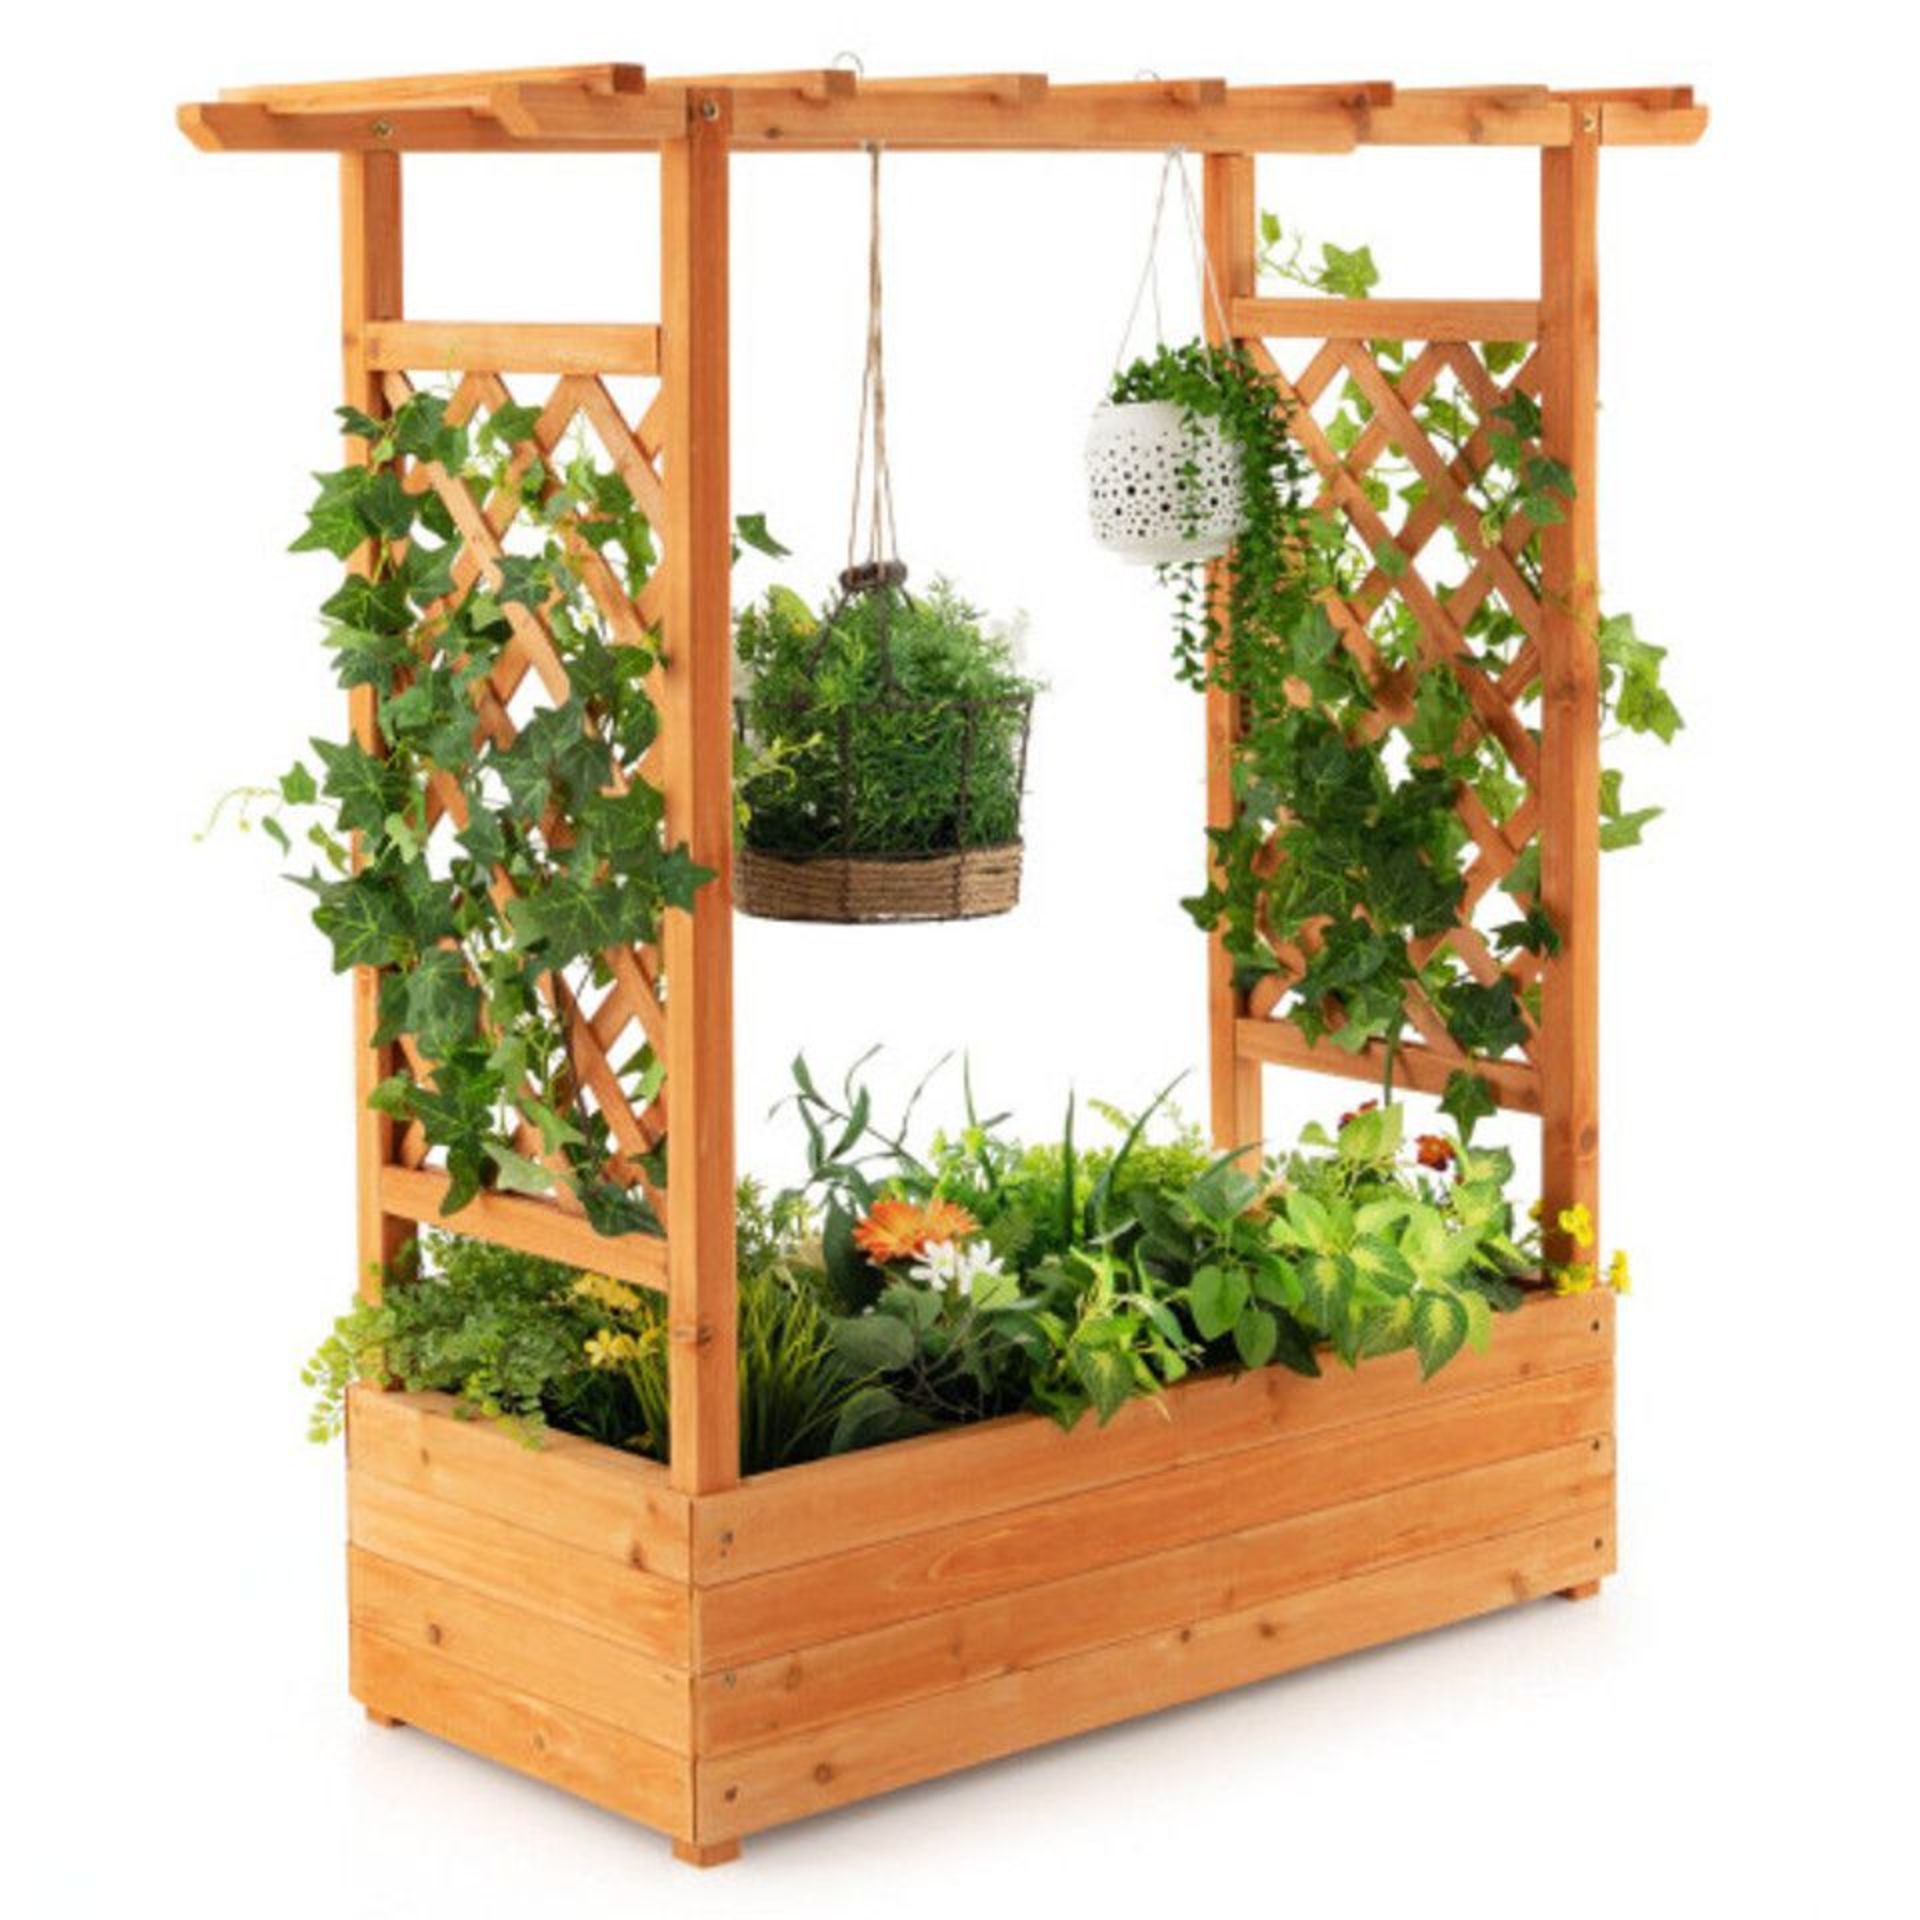 Raised Garden Bed With Trellis Or Climbing Plant And Pot Hanging-Natural. - ER53.